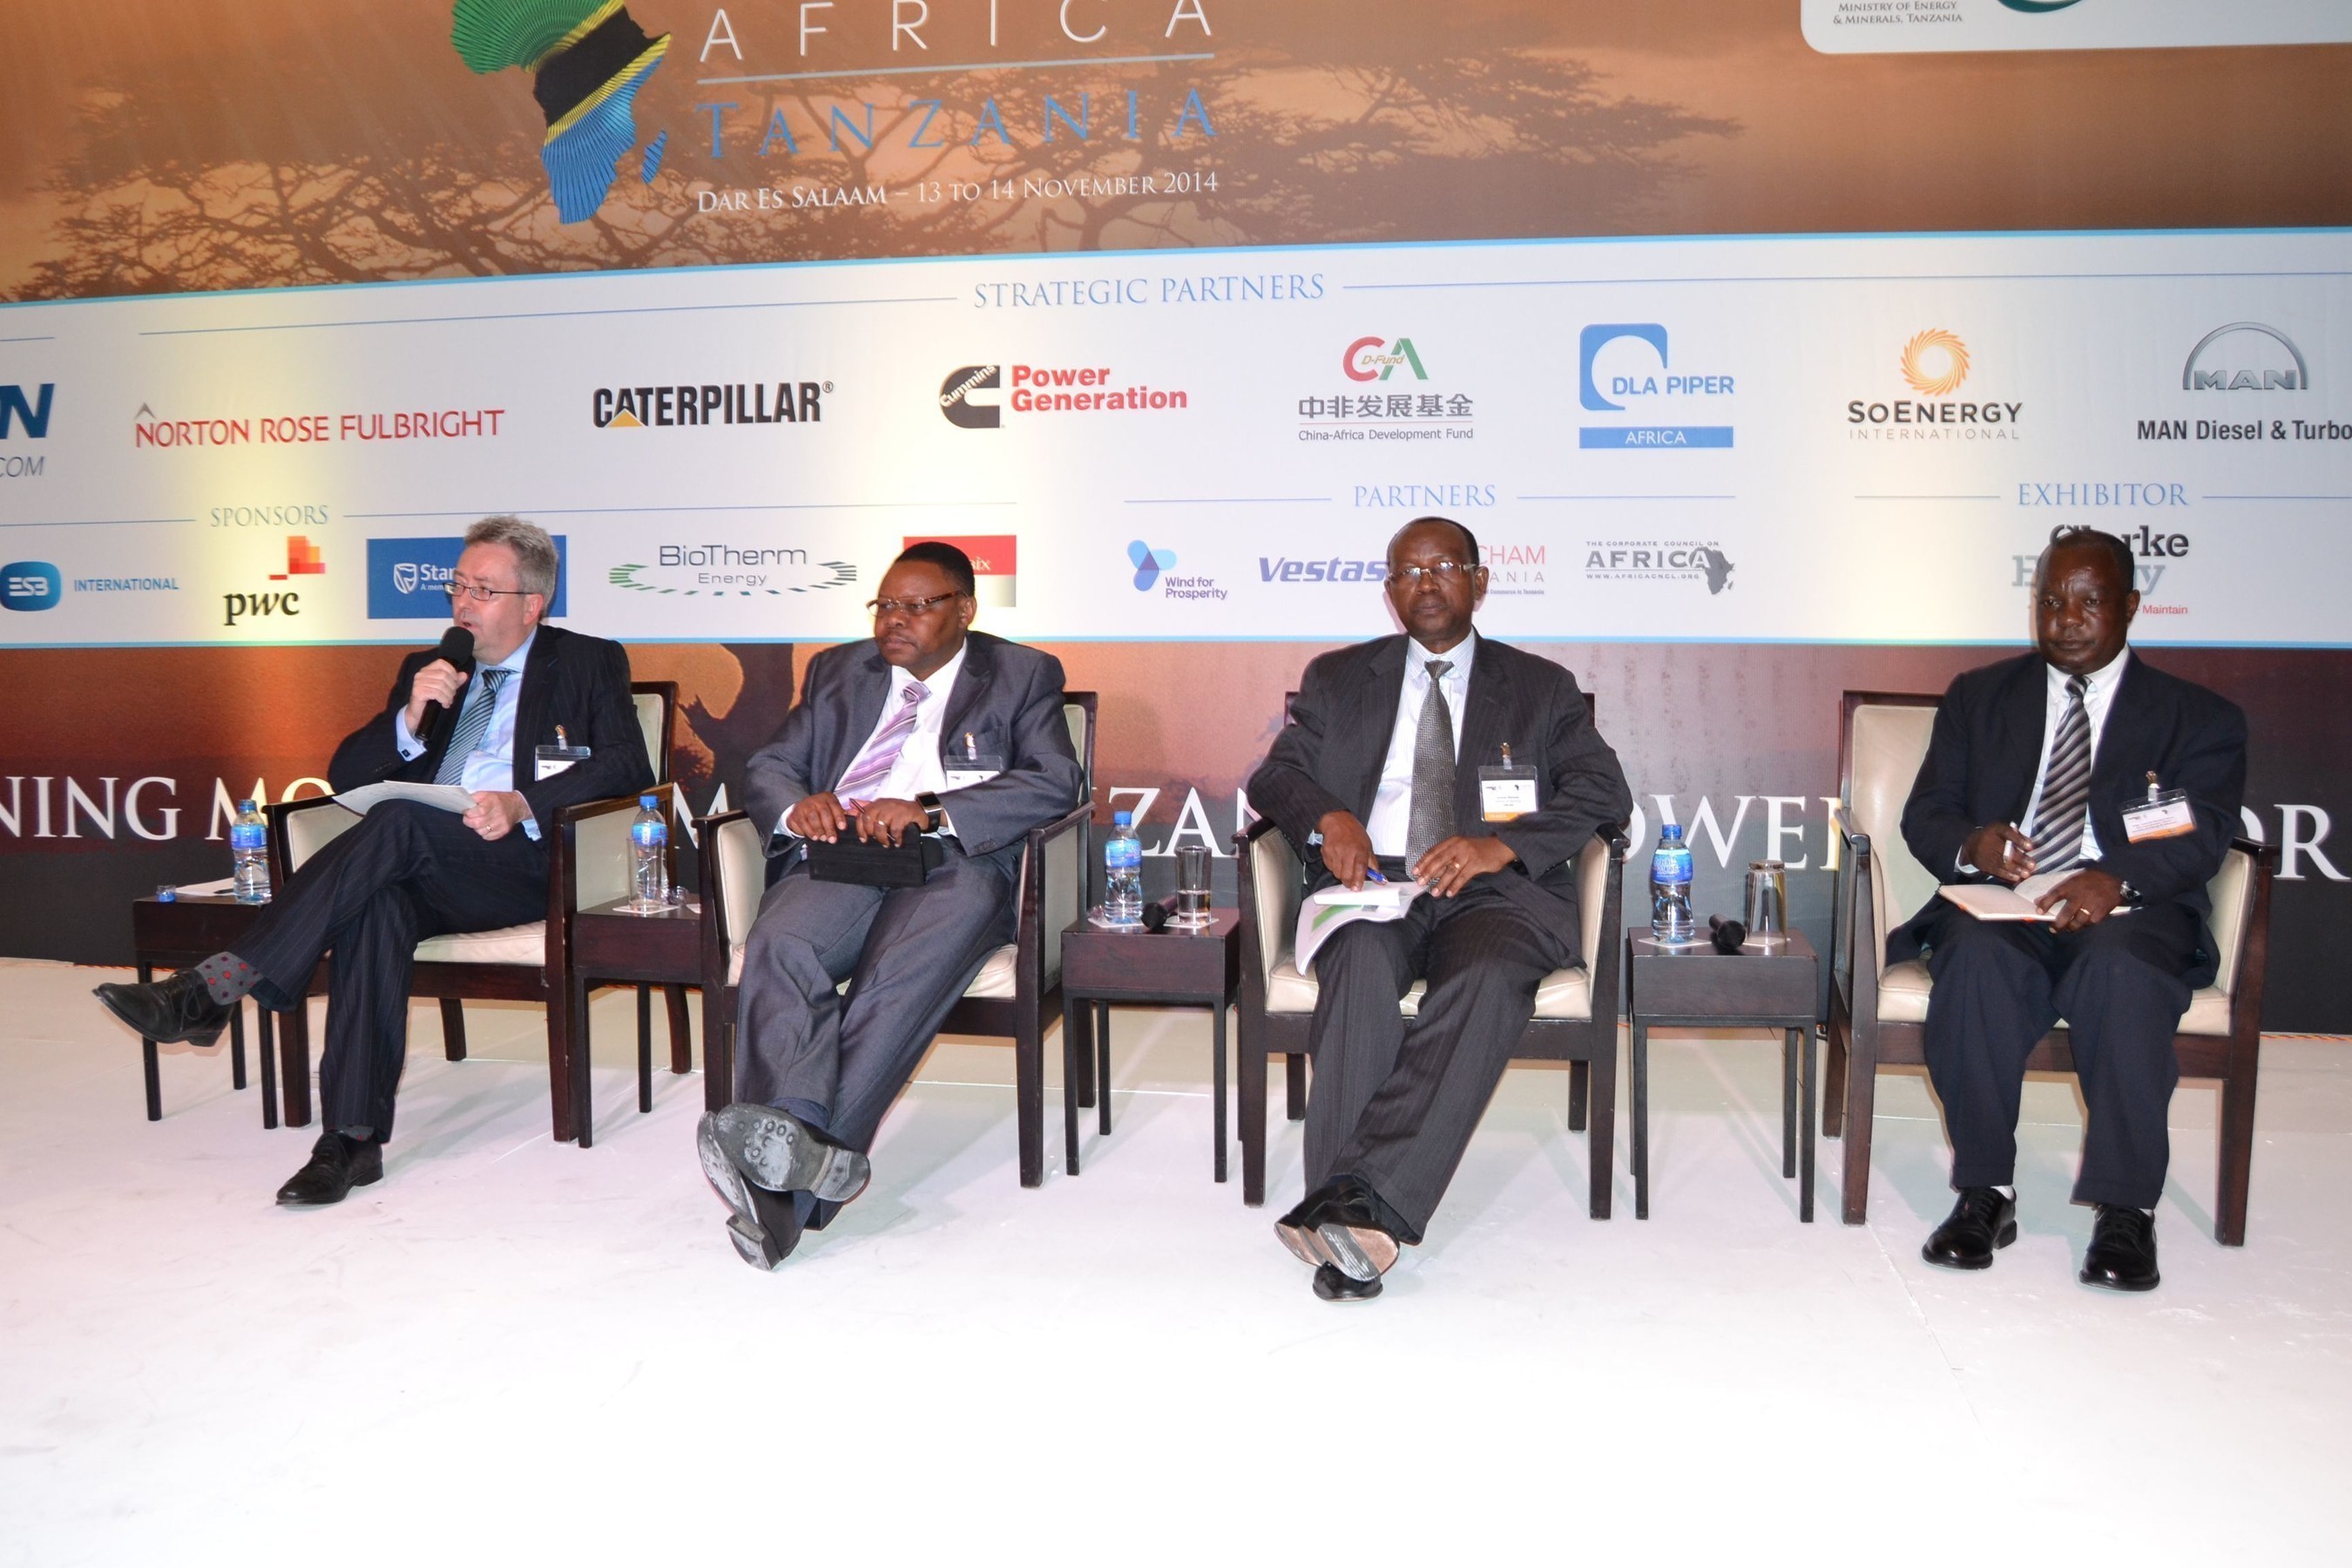 Speakers participate in a panel discussion at the annual Powering Africa: Tanzania meeting in Dar es Salaam (PRNewsFoto/EnergyNet Limited) (PRNewsFoto/EnergyNet Limited)